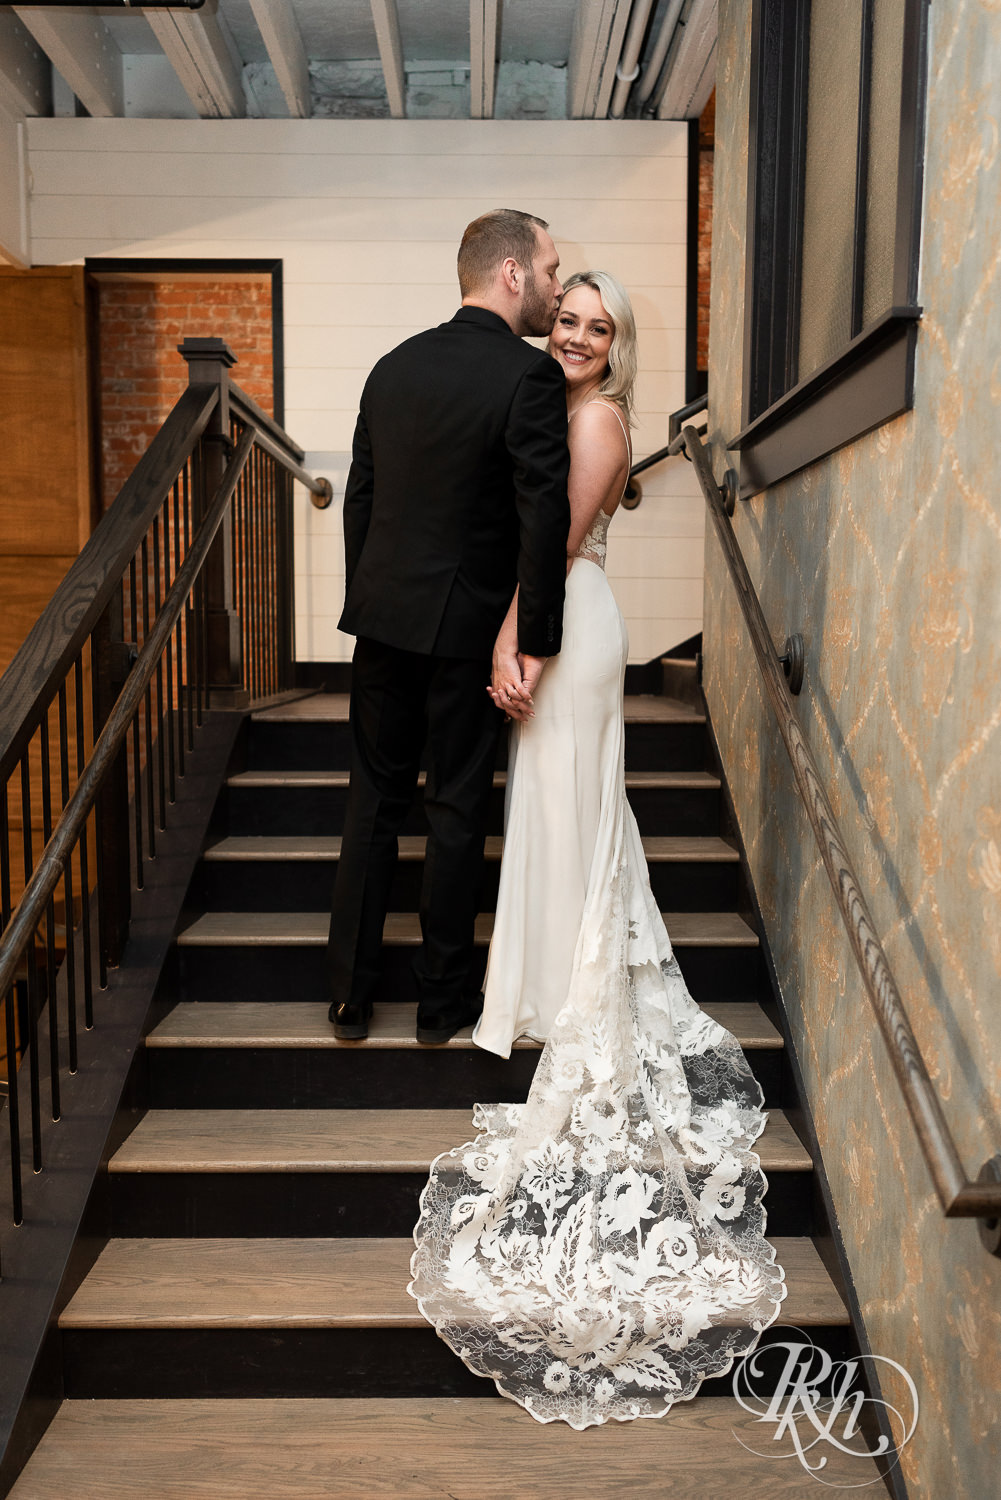 Bride and groom kissing on stairs at 3 Ten Event Venue in Faribault, Minnesota.